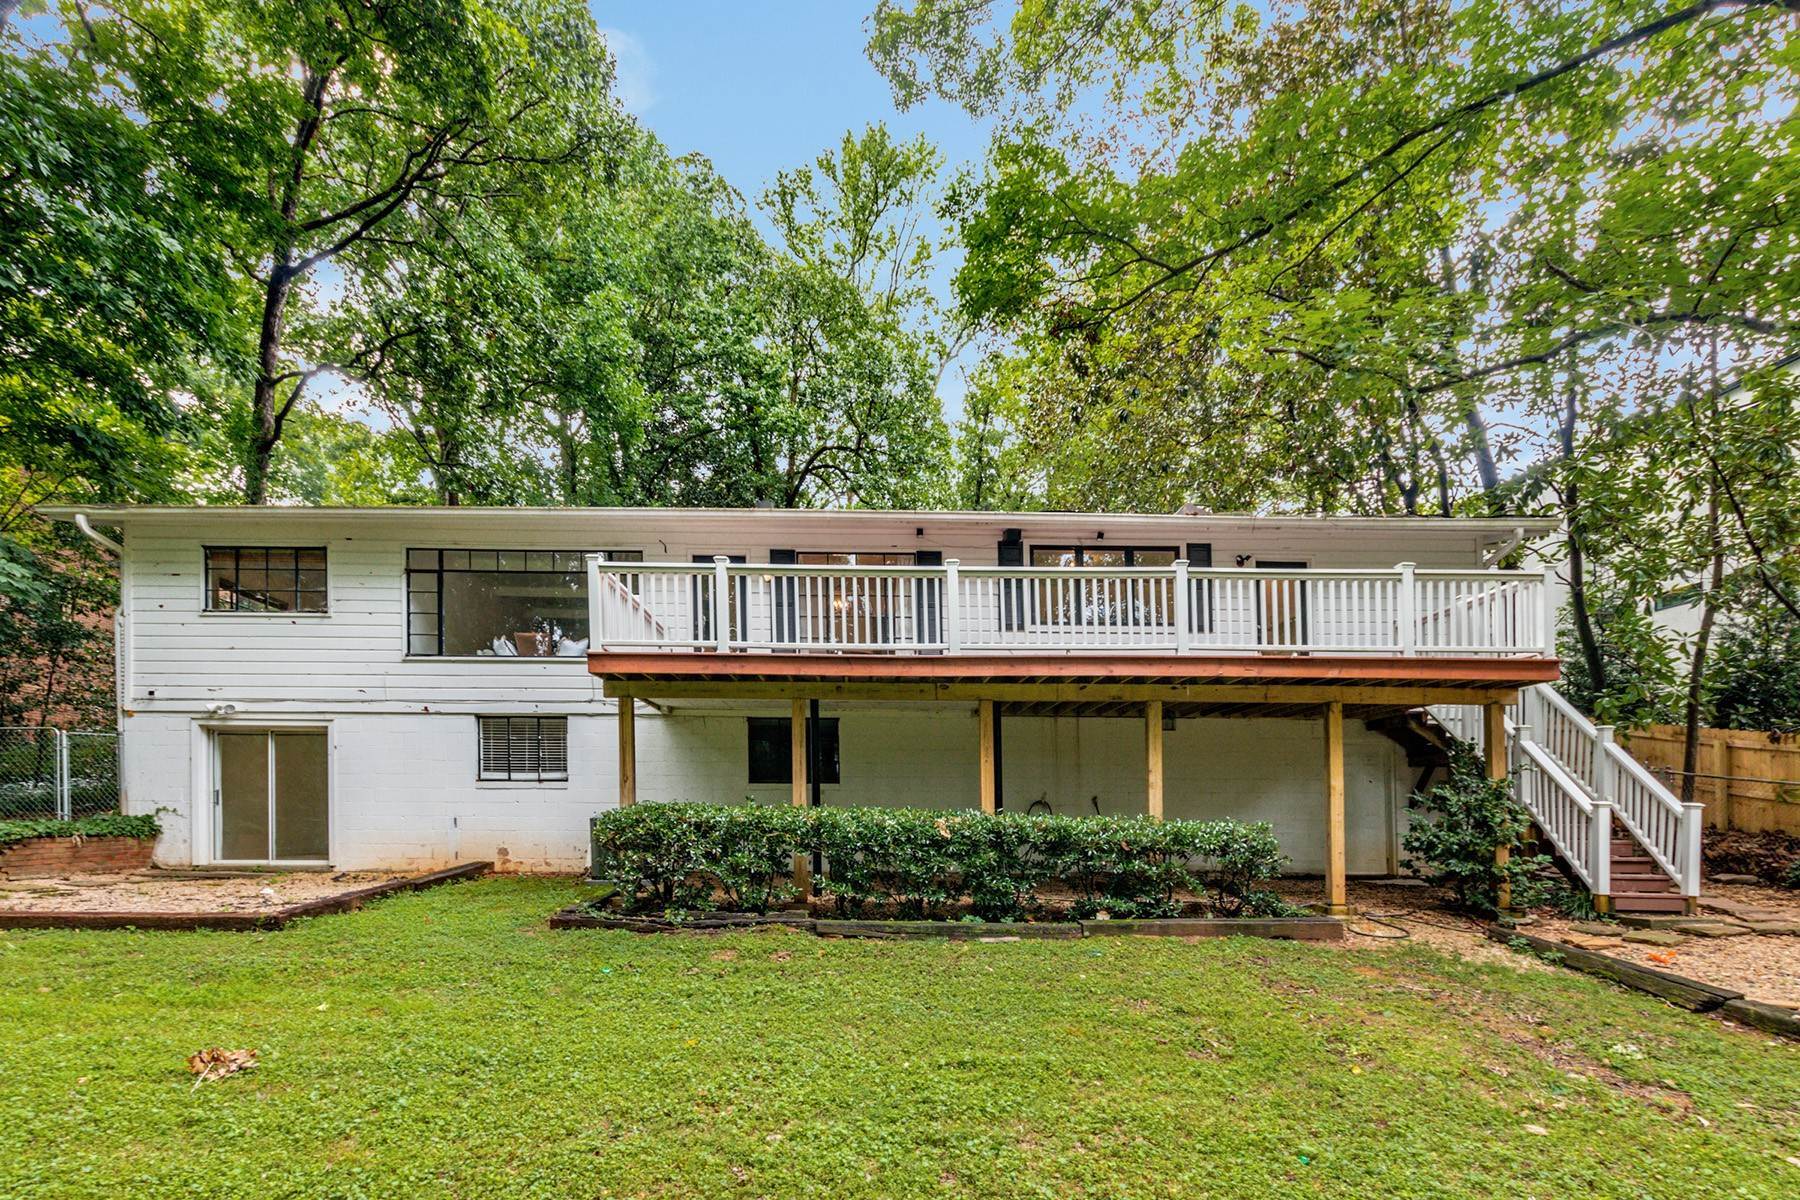 34. Land for Sale at Move-in Ready Buckhead Farmhouse Bungalow on 0.90+/- Acres 1101 Moores Mill Road NW Atlanta, Georgia 30327 United States